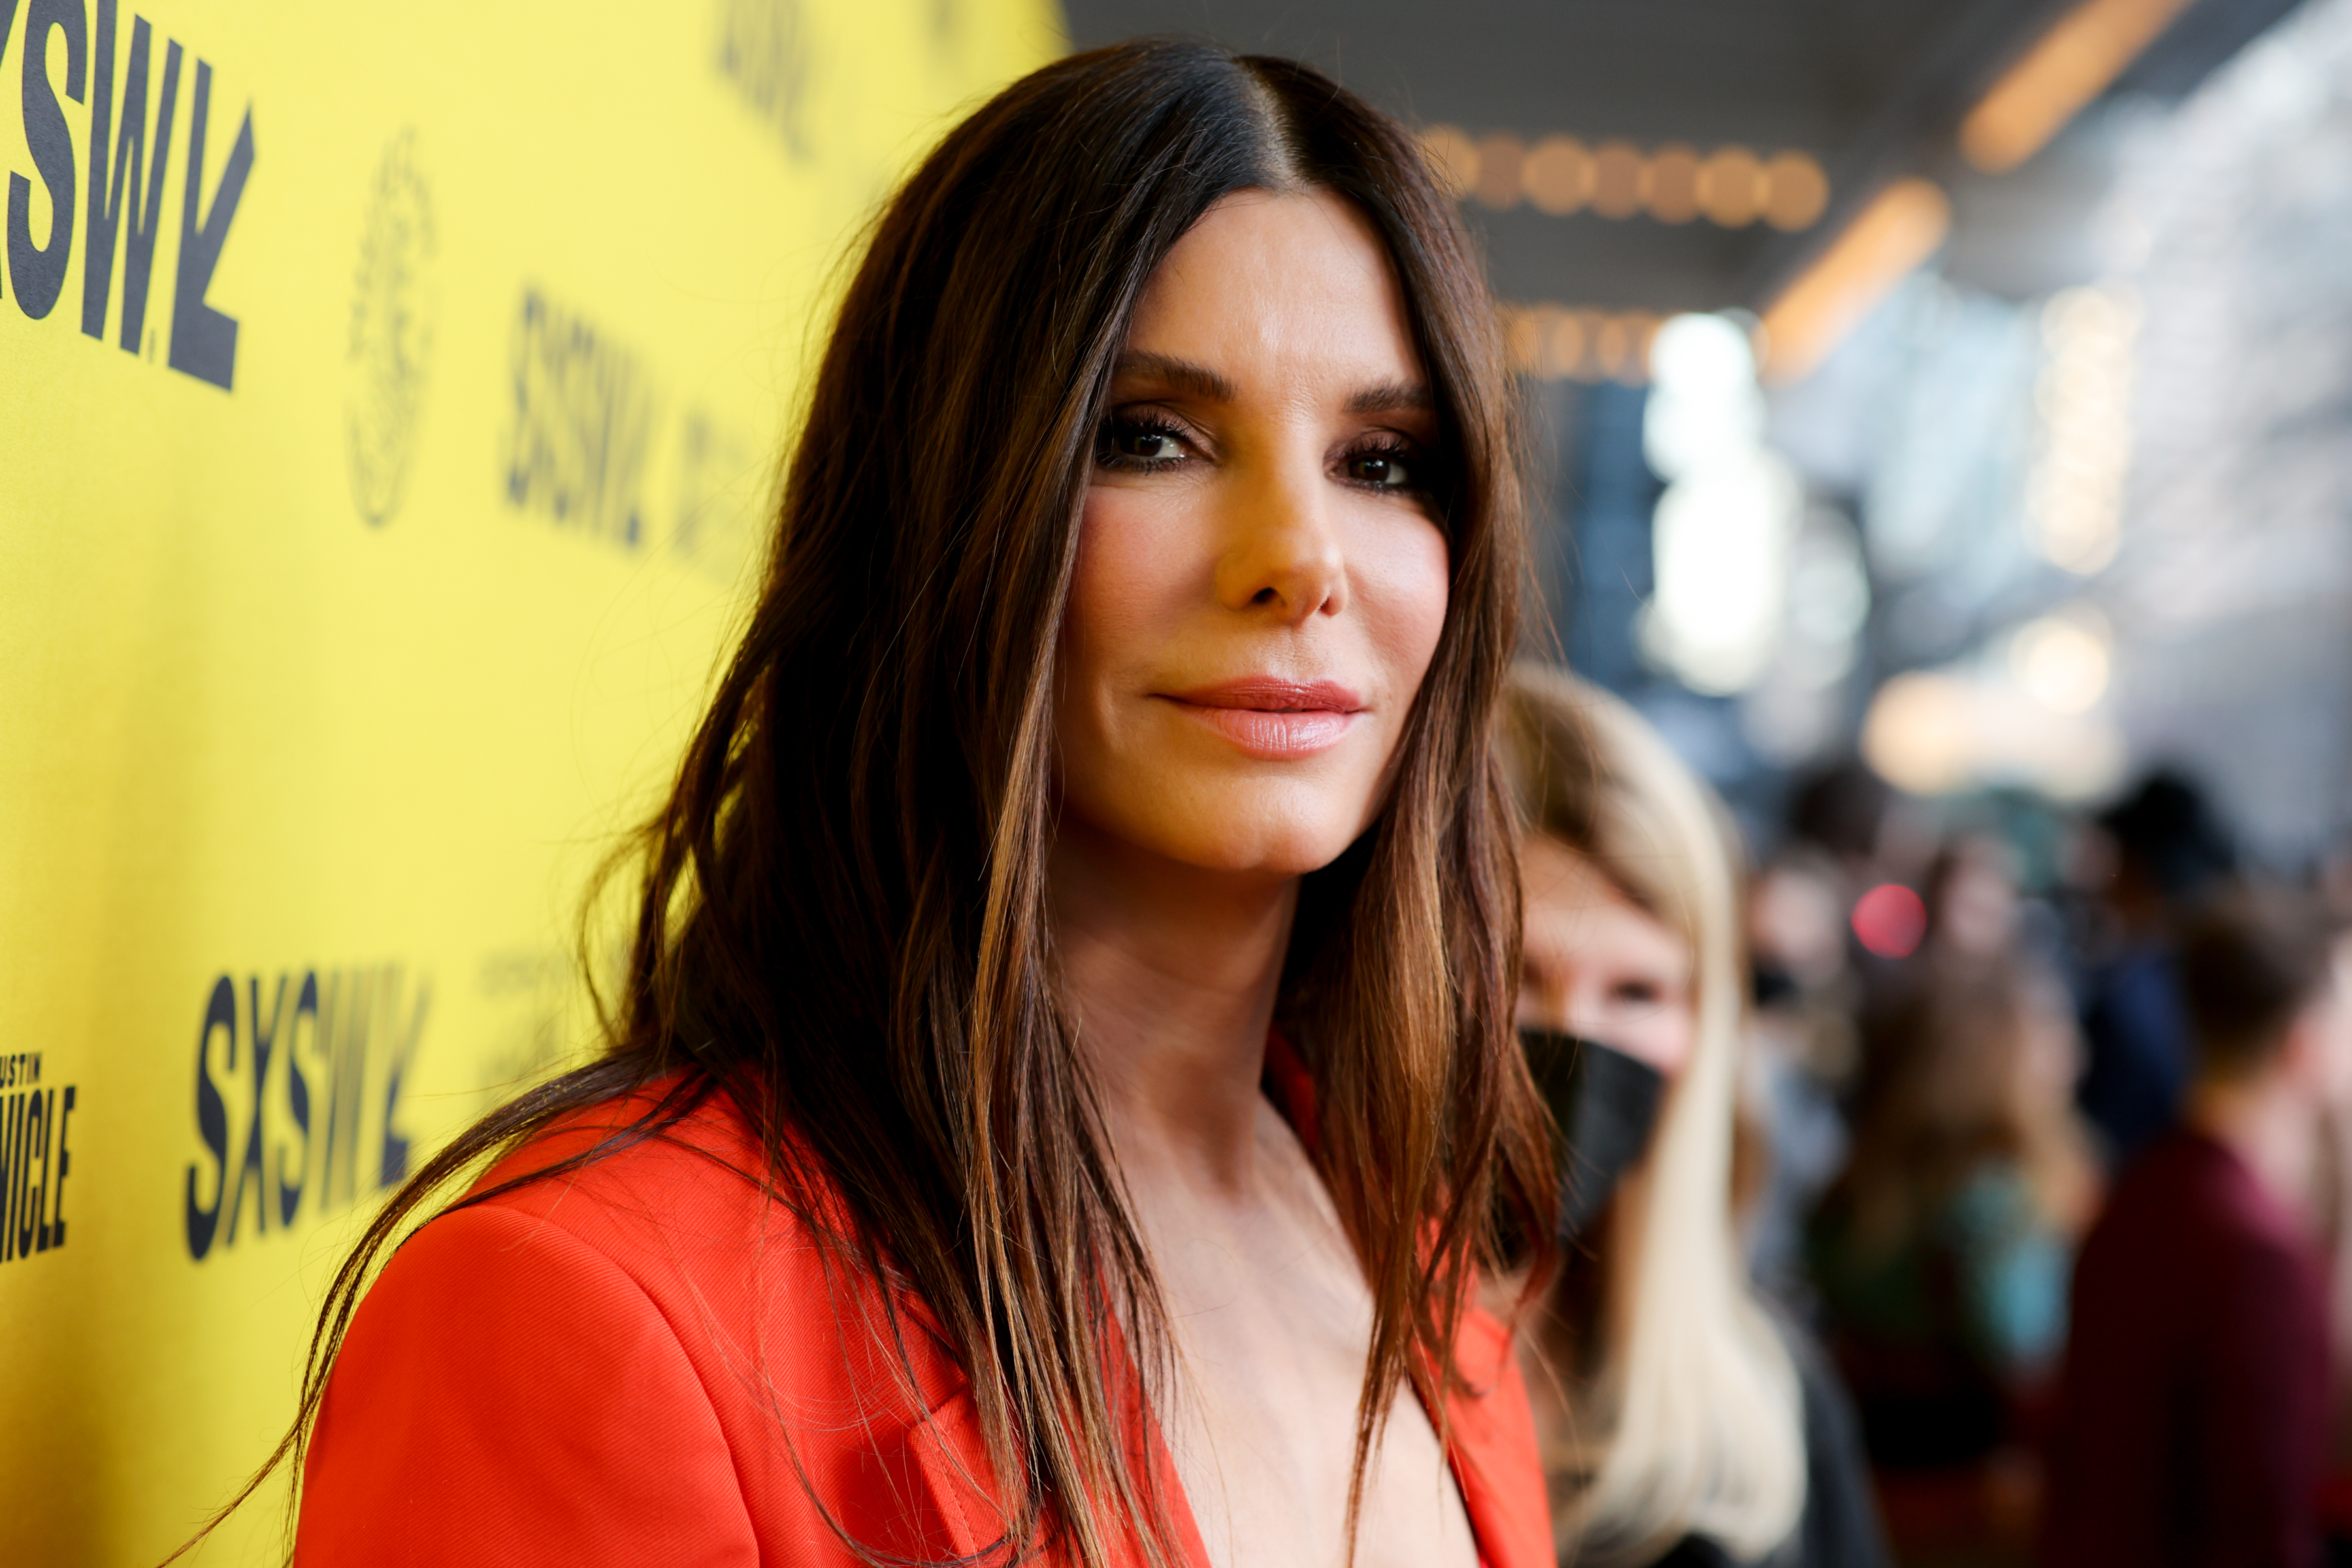 Sandra Bullock attends the premiere of "The Lost City" during the 2022 SXSW Conference and Festivals at The Paramount Theatre on March 12, 2022 in Austin, Texas | Source: Getty Images